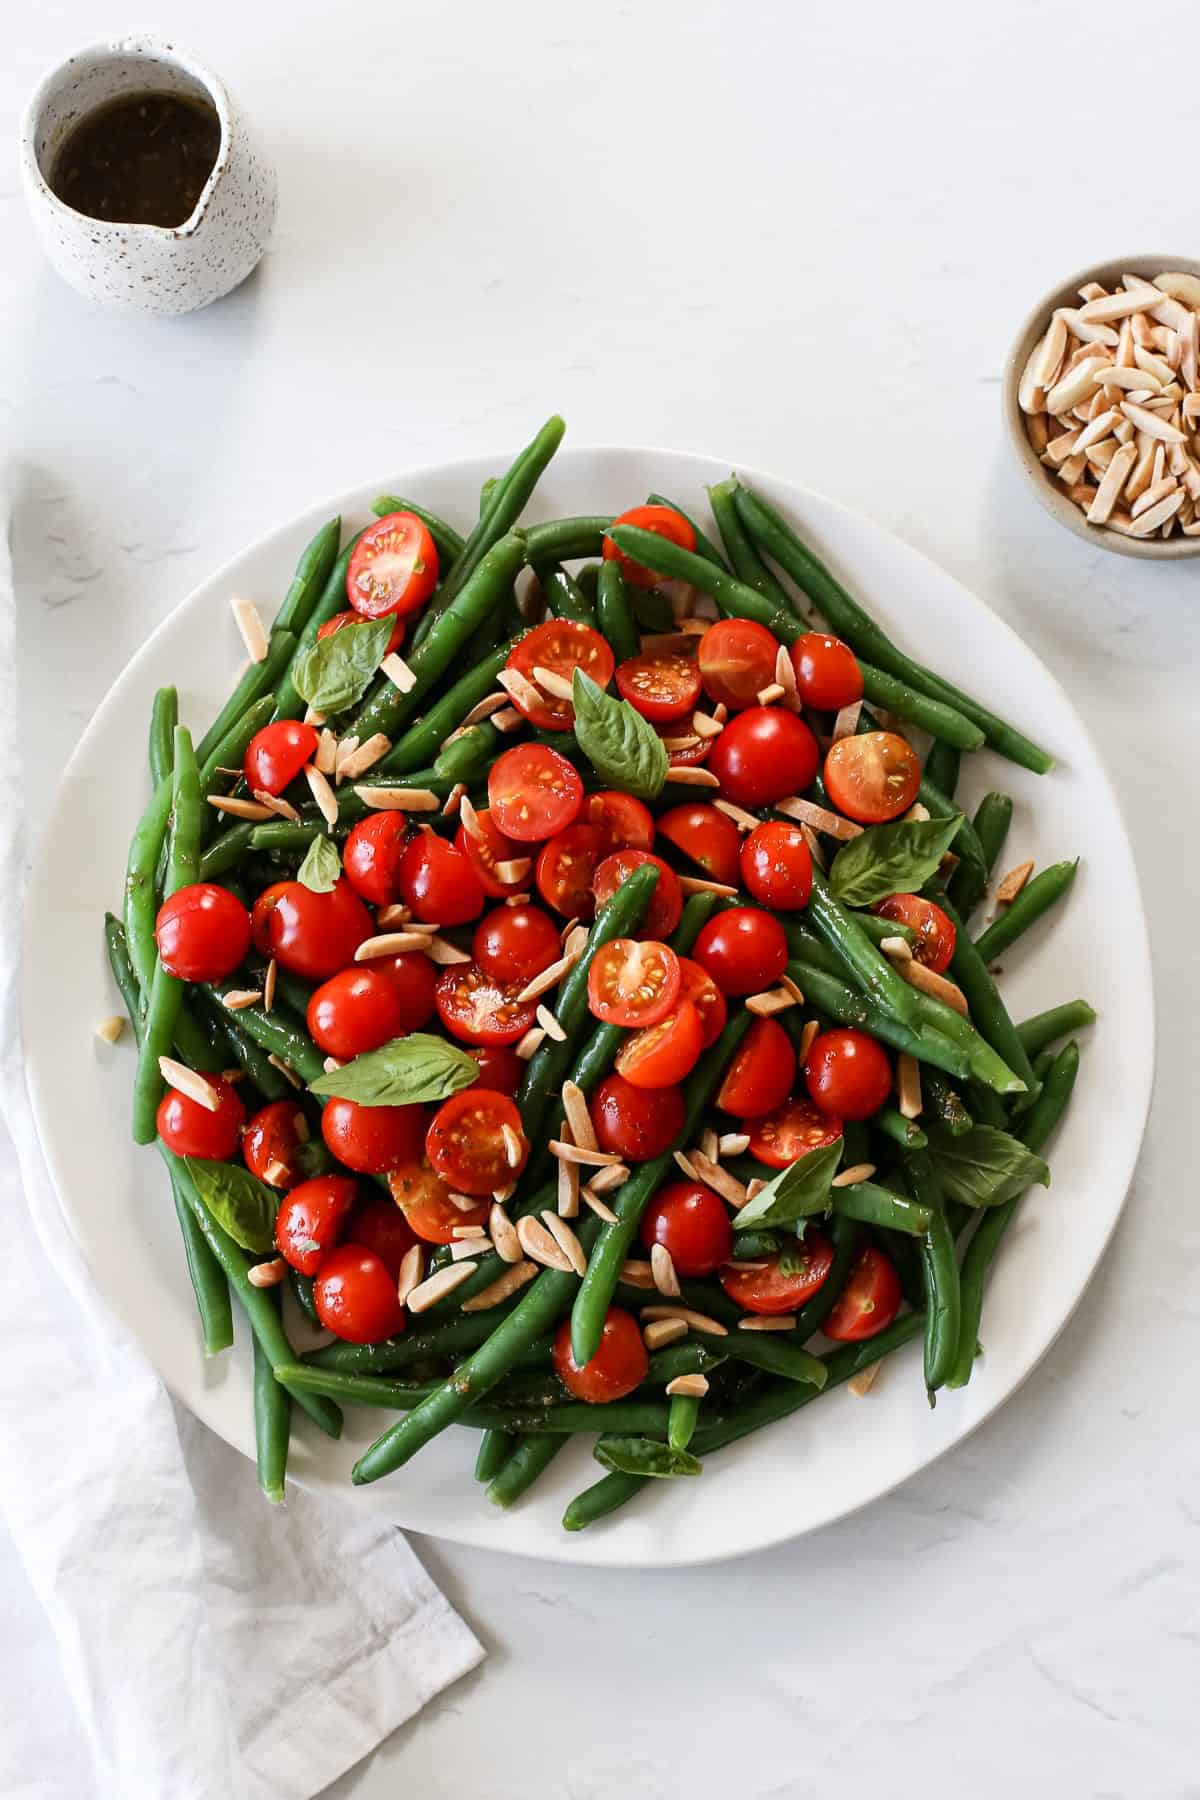 A colorful Italian green bean salad with cherry tomatoes, toasted almonds, and fresh basil leaves.